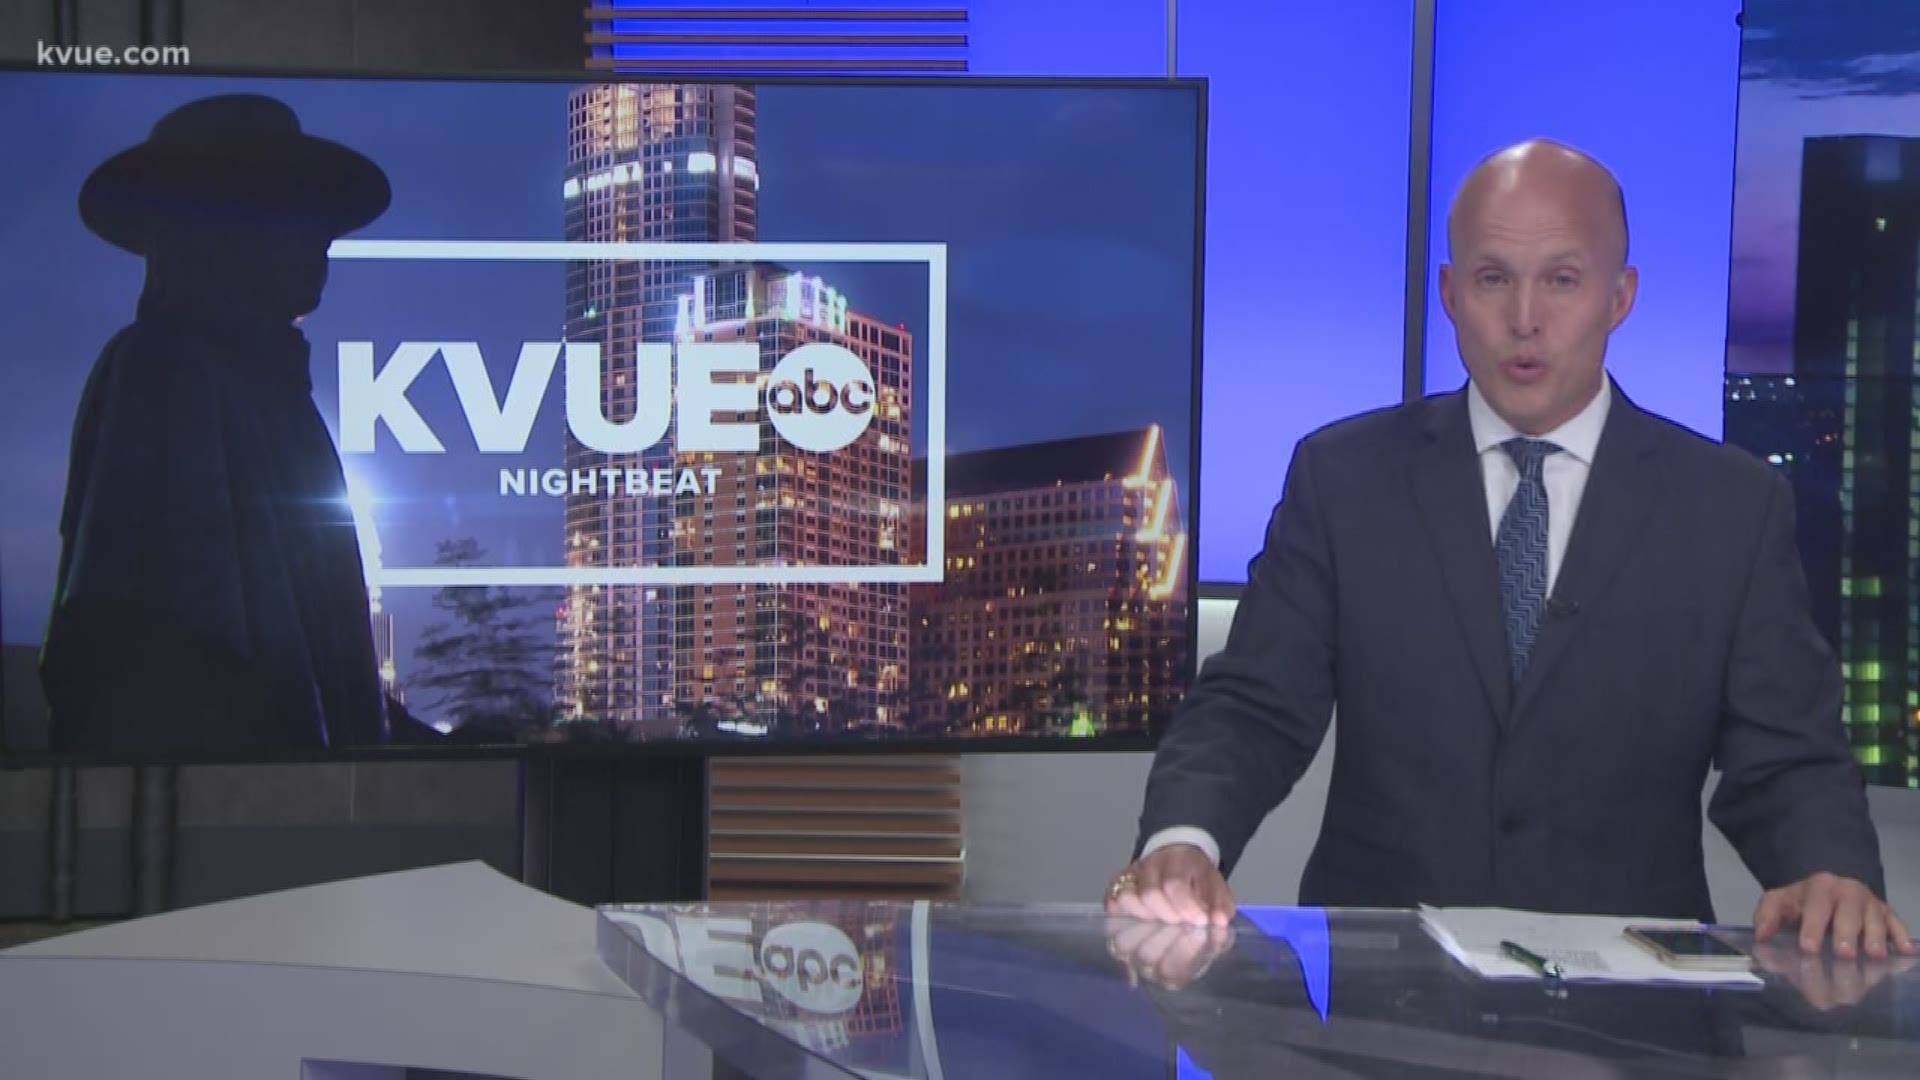 Sports reporter and anchor Shawn Clynch says goodbye to KVUE.